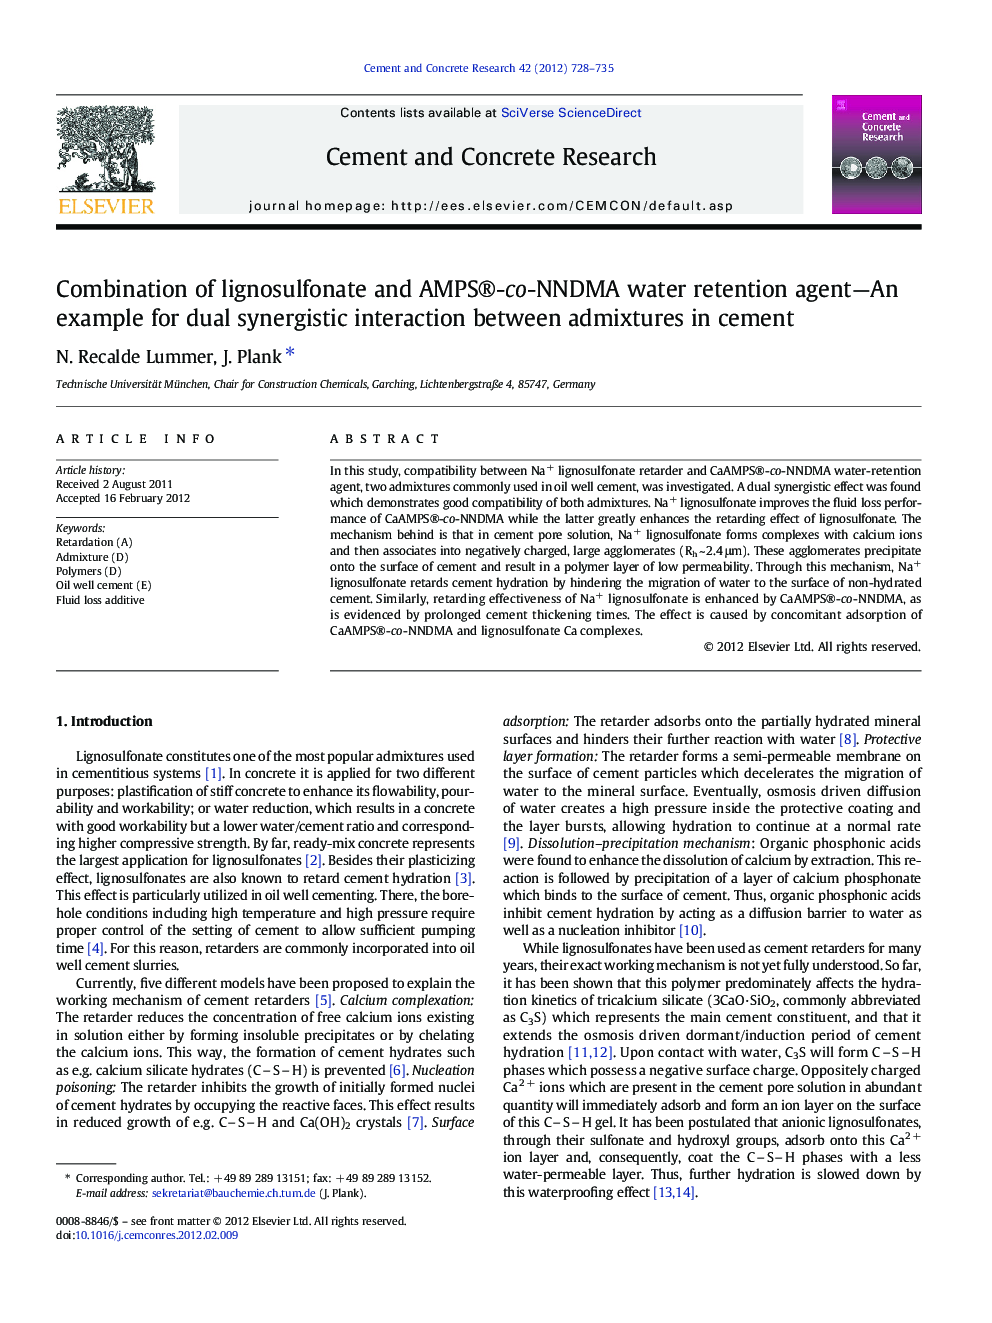 Combination of lignosulfonate and AMPS®-co-NNDMA water retention agent—An example for dual synergistic interaction between admixtures in cement